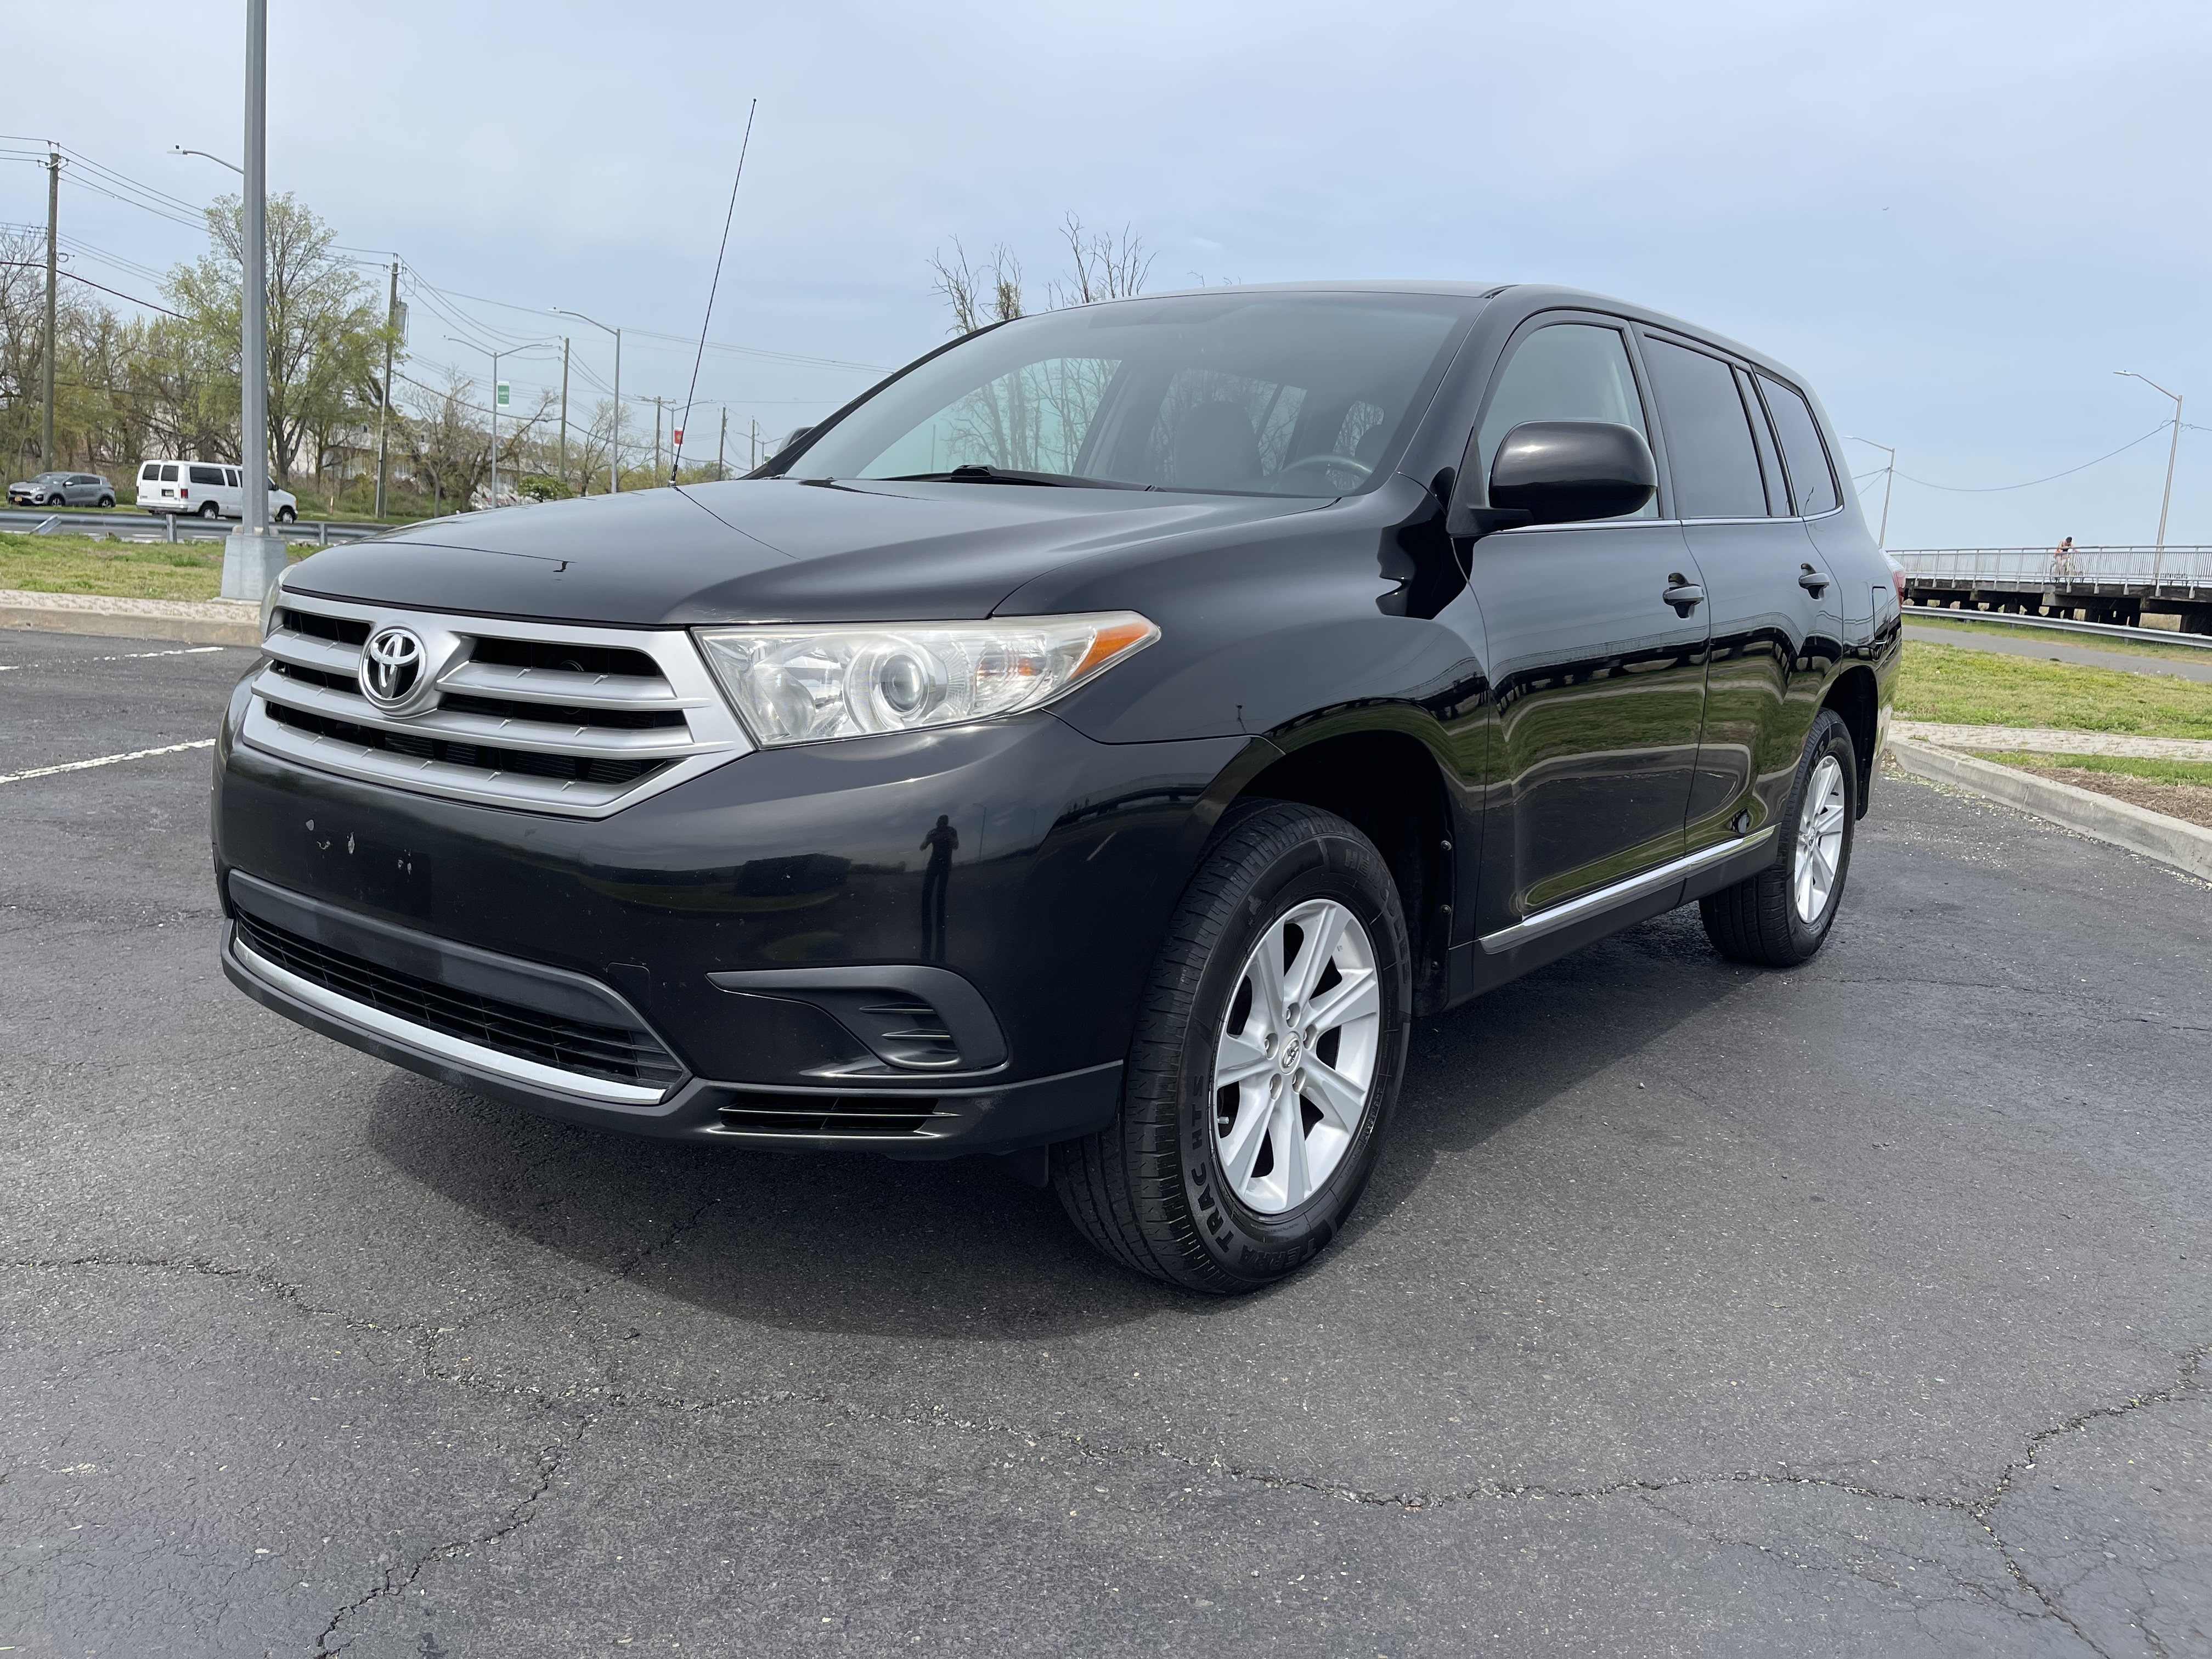 Used Car - 2012 Toyota Highlander Base AWD for Sale in Staten Island, NY